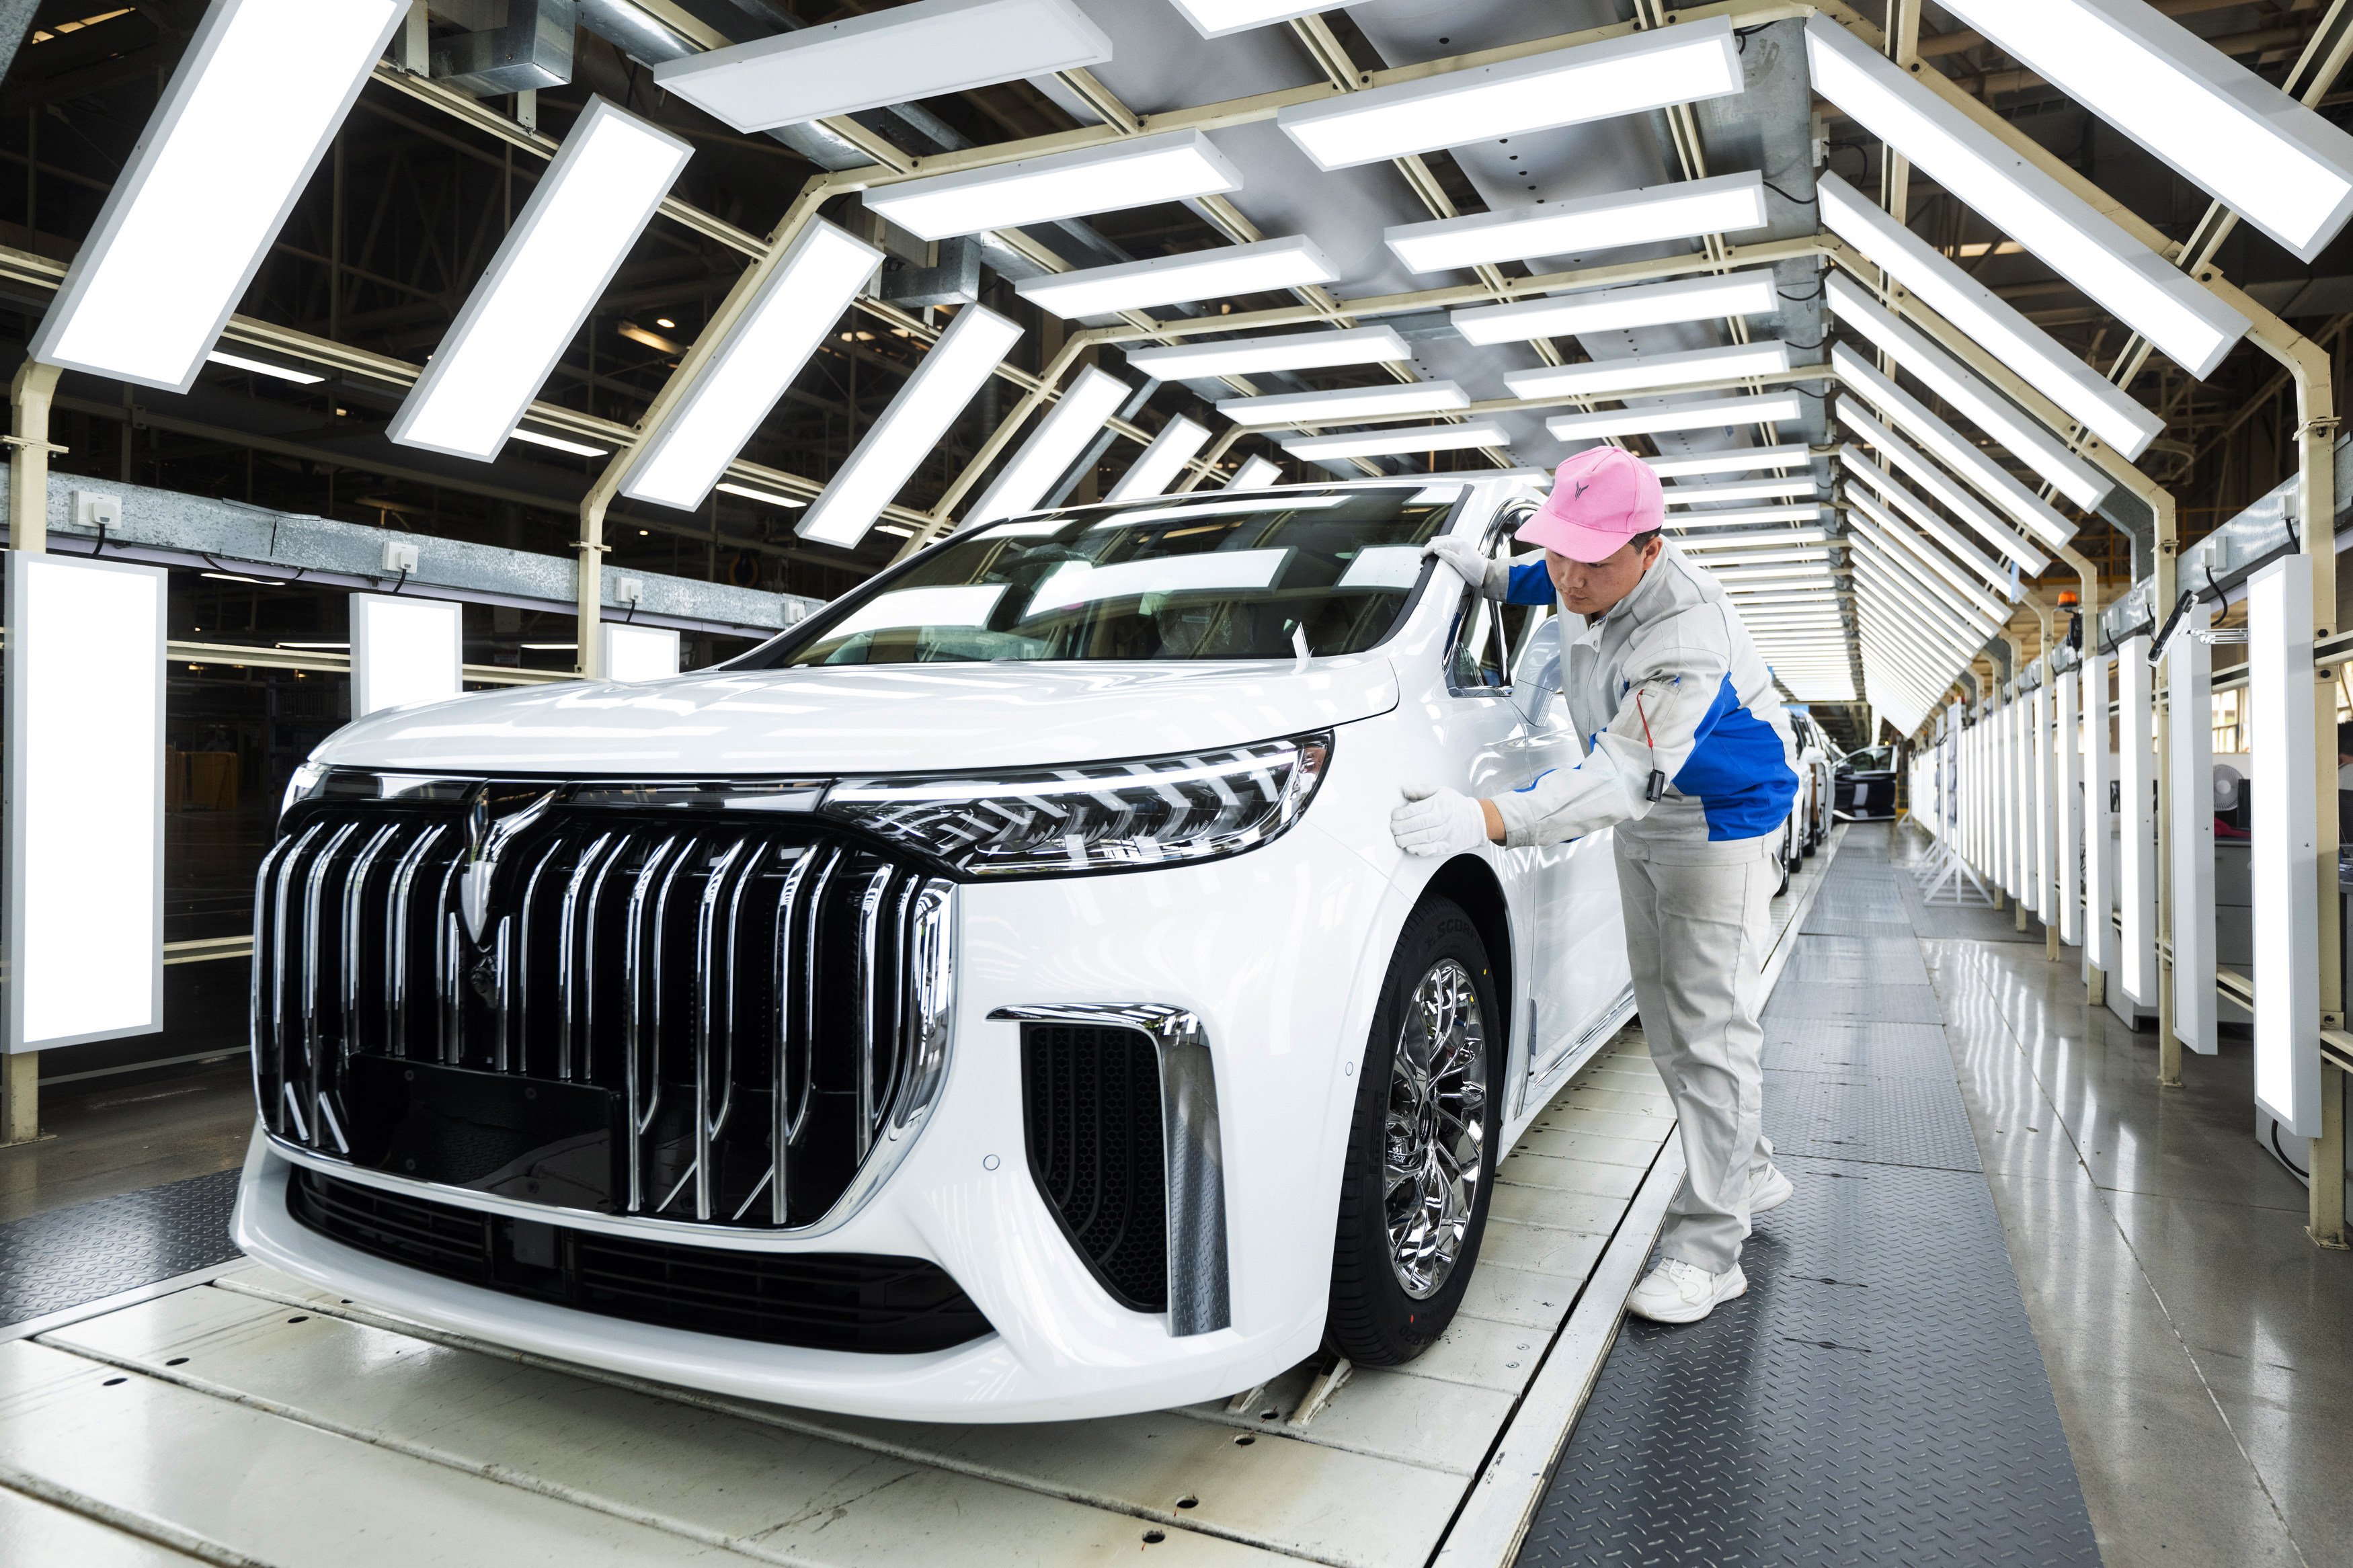 An employee works on an assembly line for Dongfeng Motor’s Voyah electric cars. Photo: Xinhua